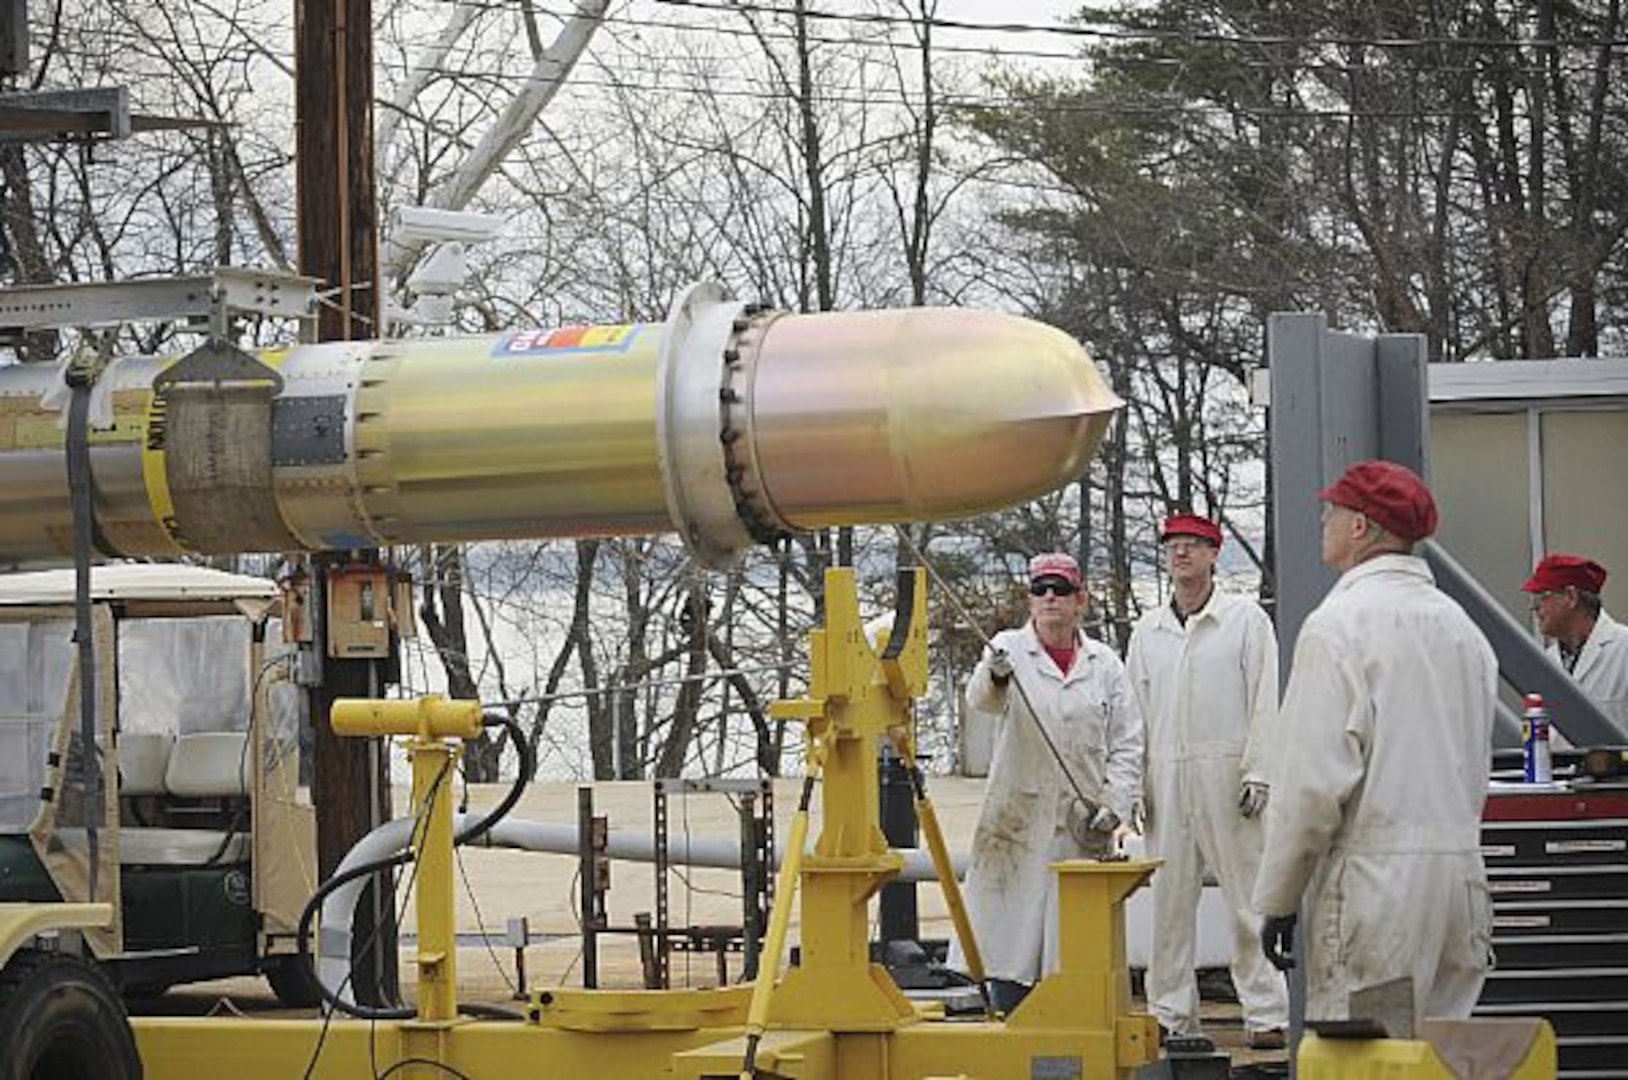 INDIAN HEAD, Maryland - The Navy's Tactical Tomahawk missile underwent a successful production acceptance test using Functional Ground Test (FGT) capability at Naval Surface Warfare Center Indian Head Explosive Ordnance Disposal Technology Division's (NSWC IHEODTD) , March 19. 